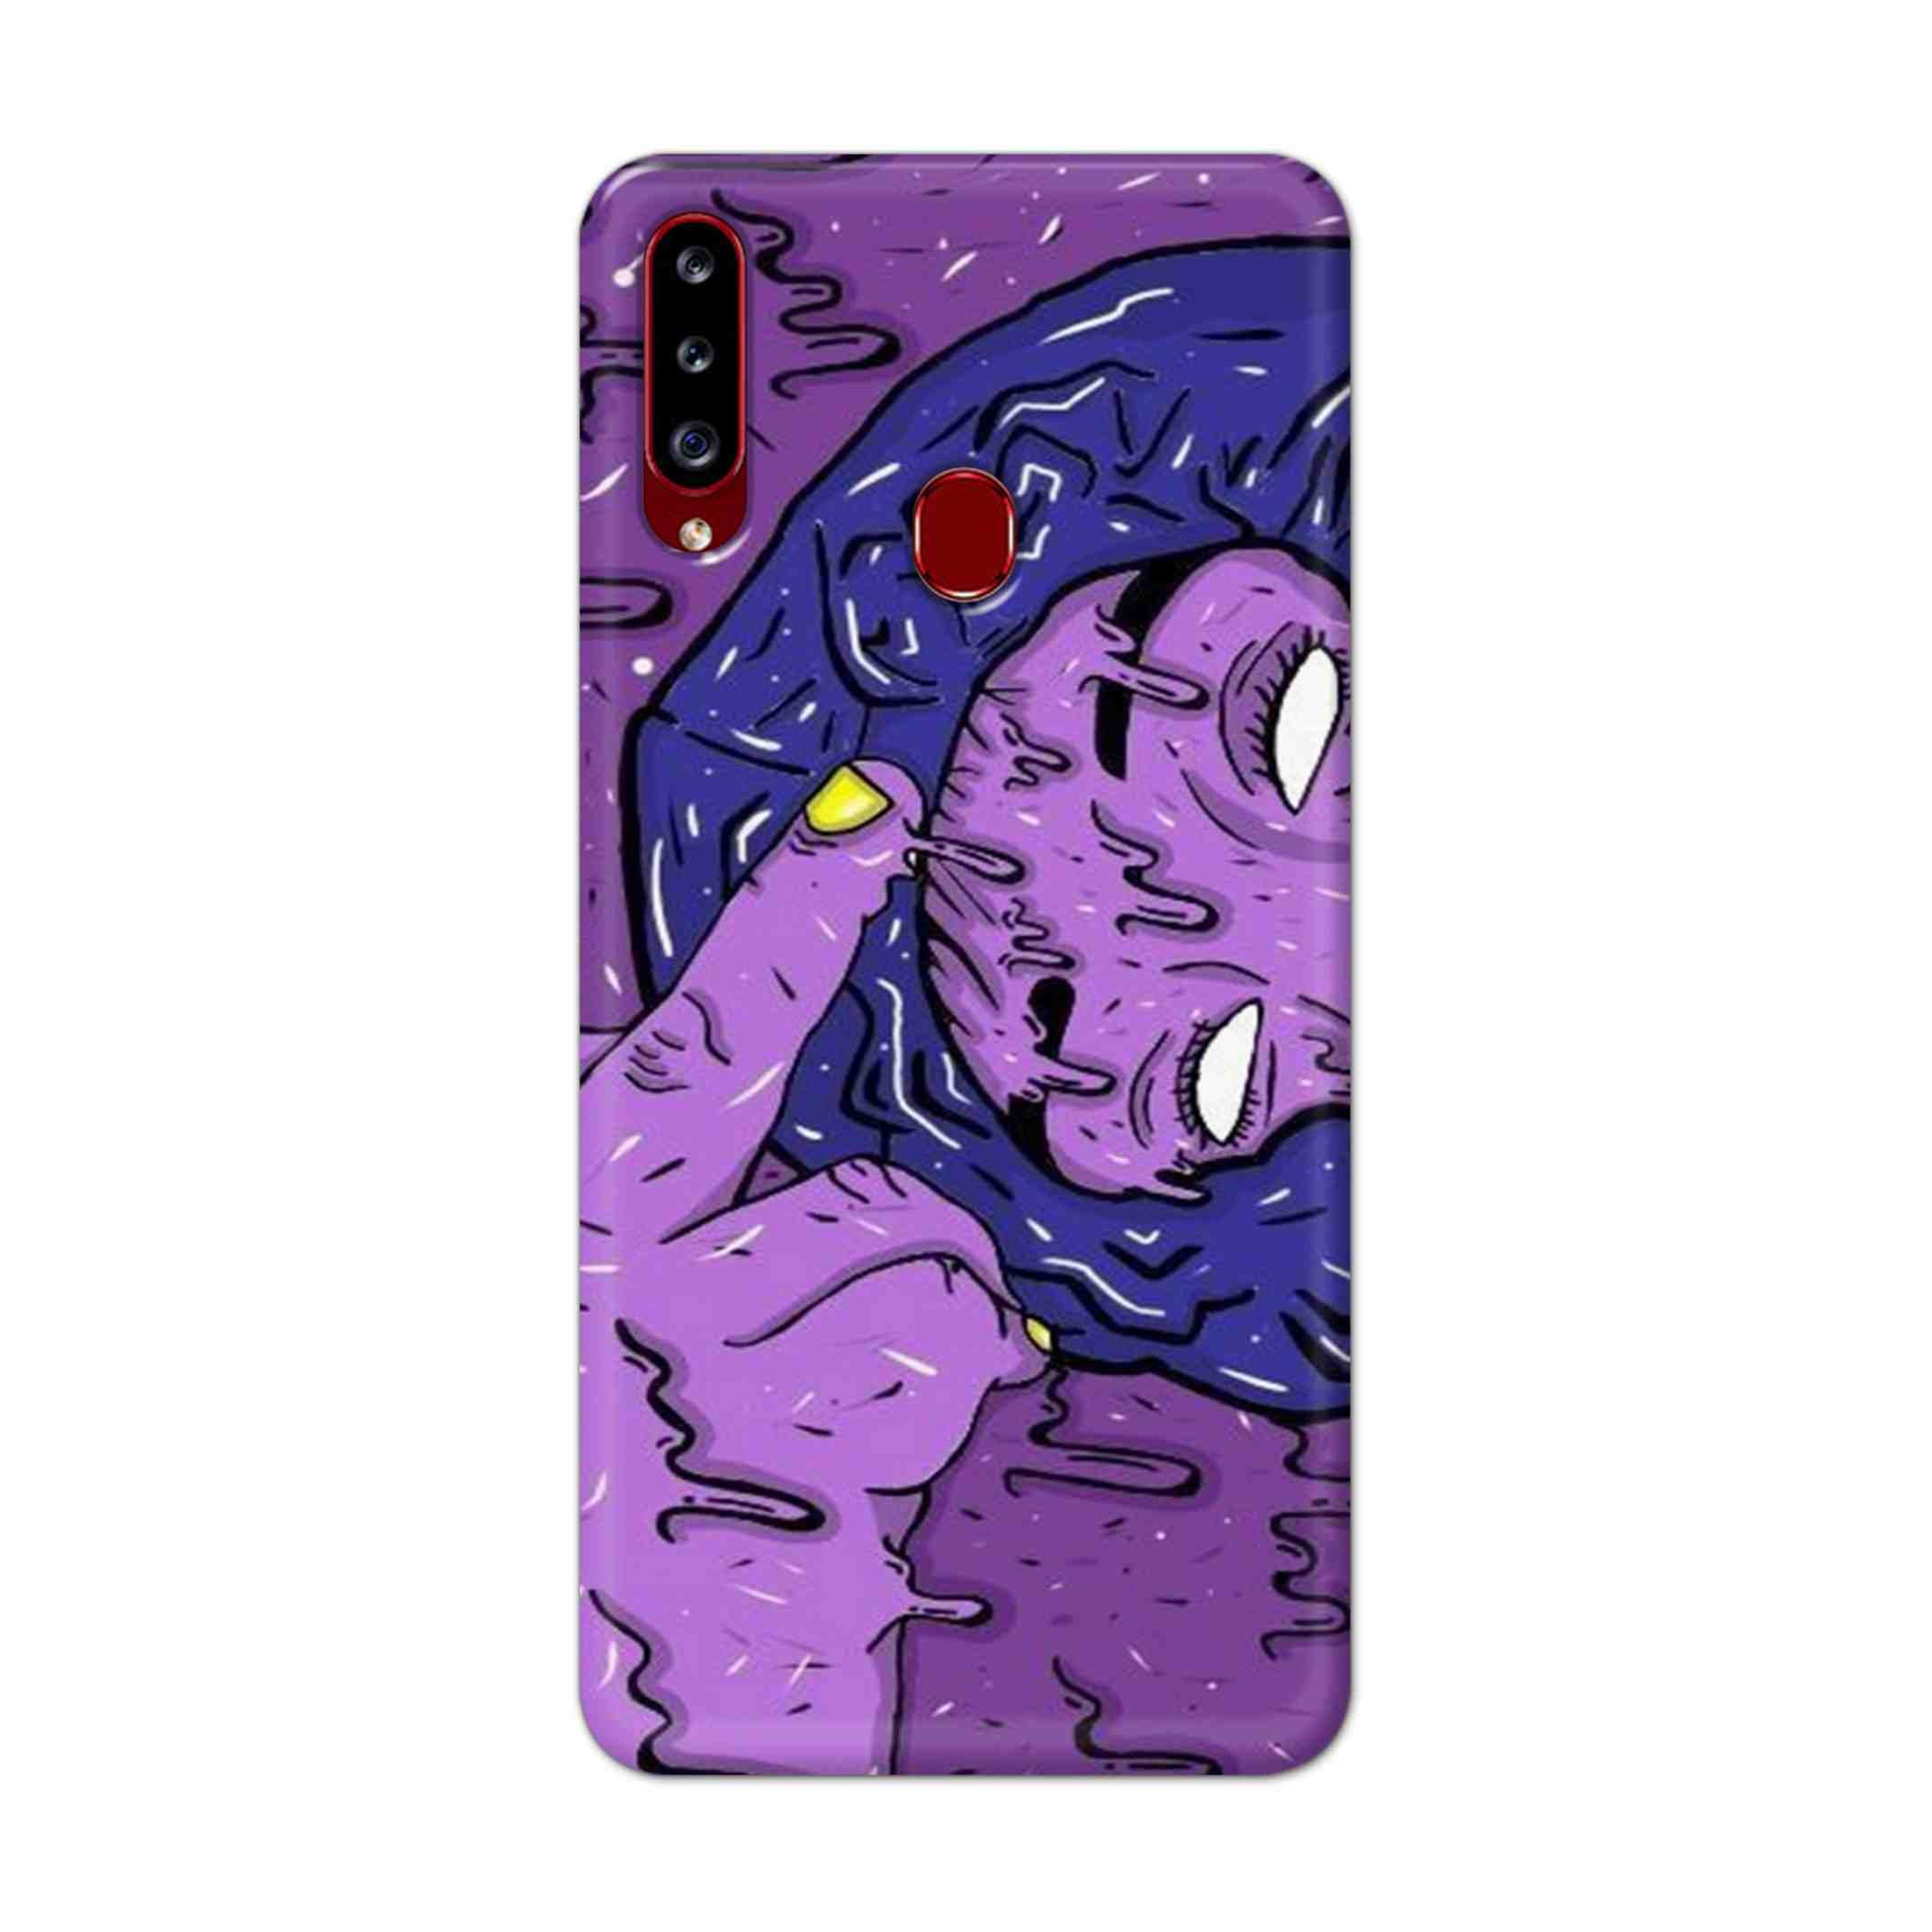 Buy Dashing Art Hard Back Mobile Phone Case Cover For Samsung A20s Online